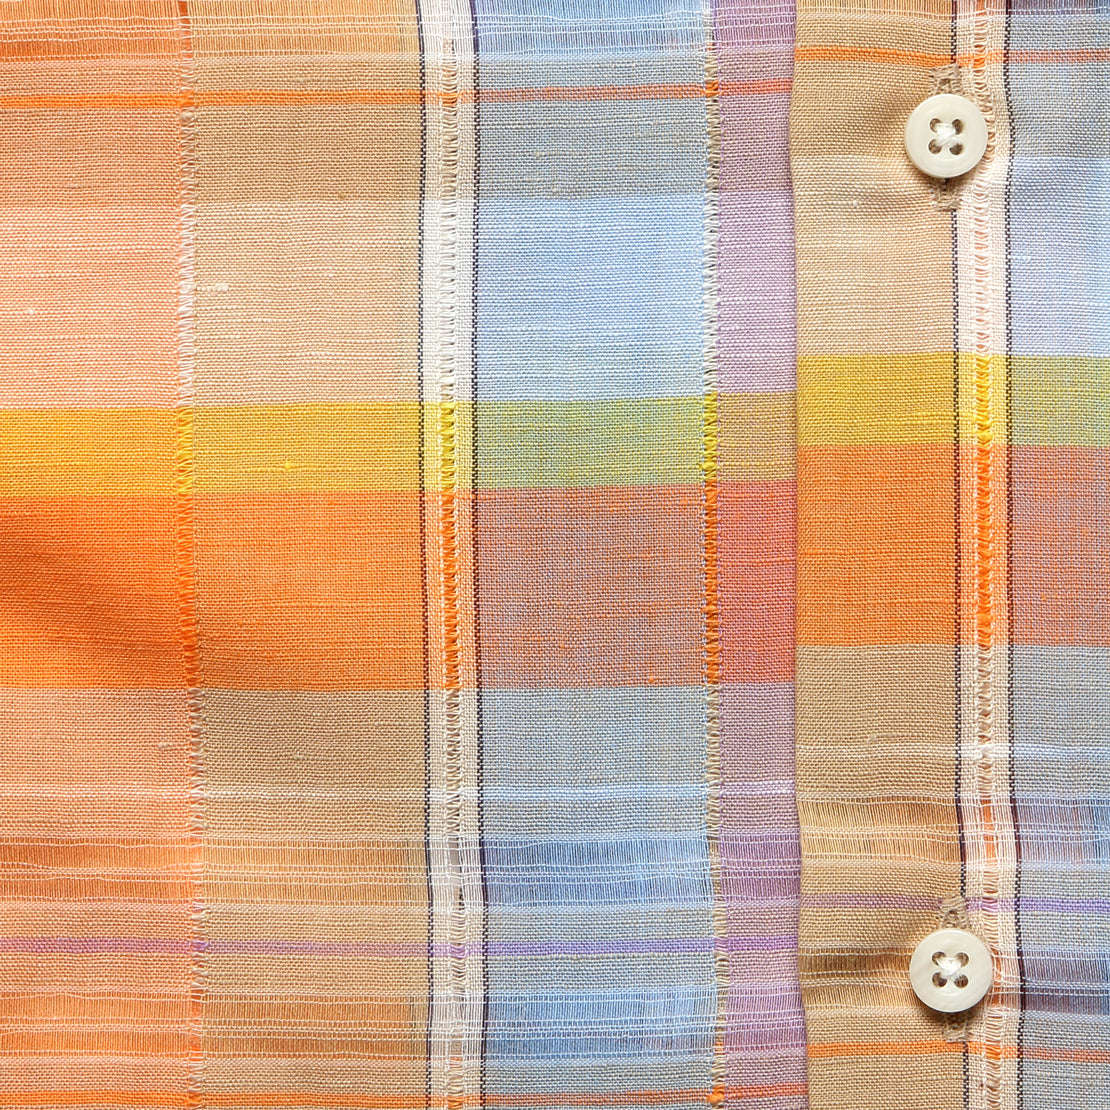 Ghost Weave Camp Shirt - Orange - Gitman Vintage - STAG Provisions - Tops - S/S Woven - Plaid